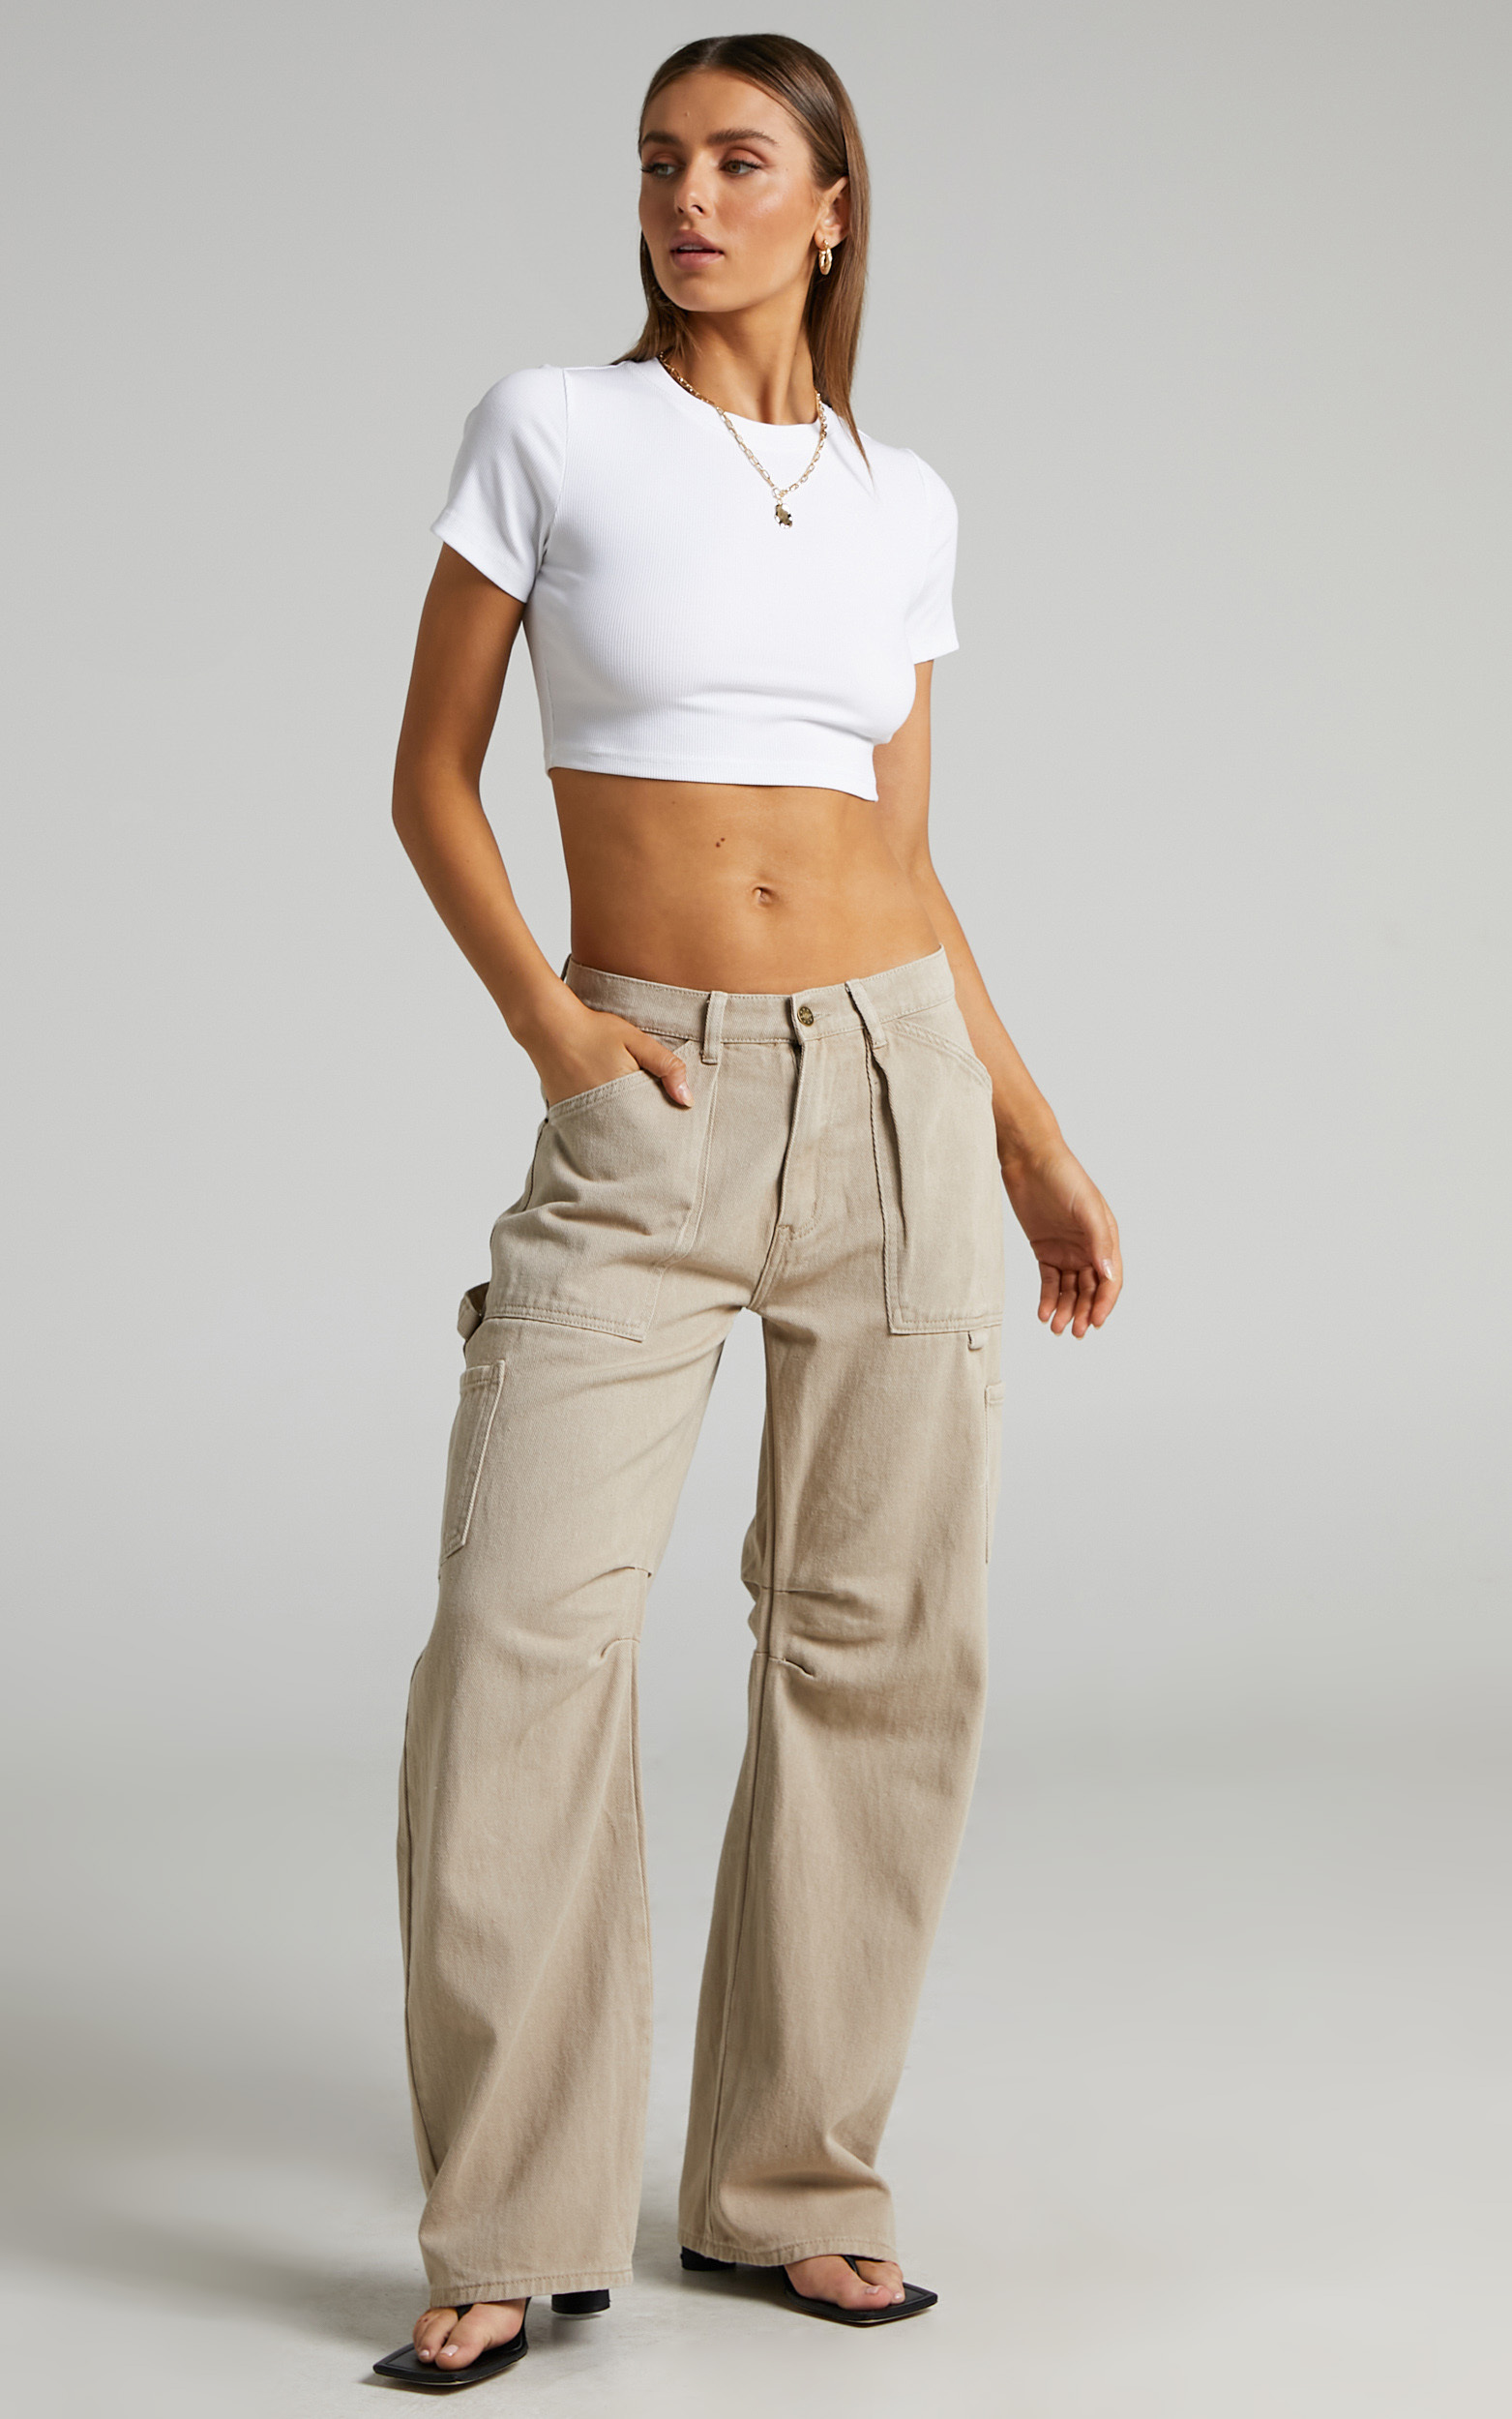 Lioness - Miami Vice Pants in Beige - L, BRN2, hi-res image number null